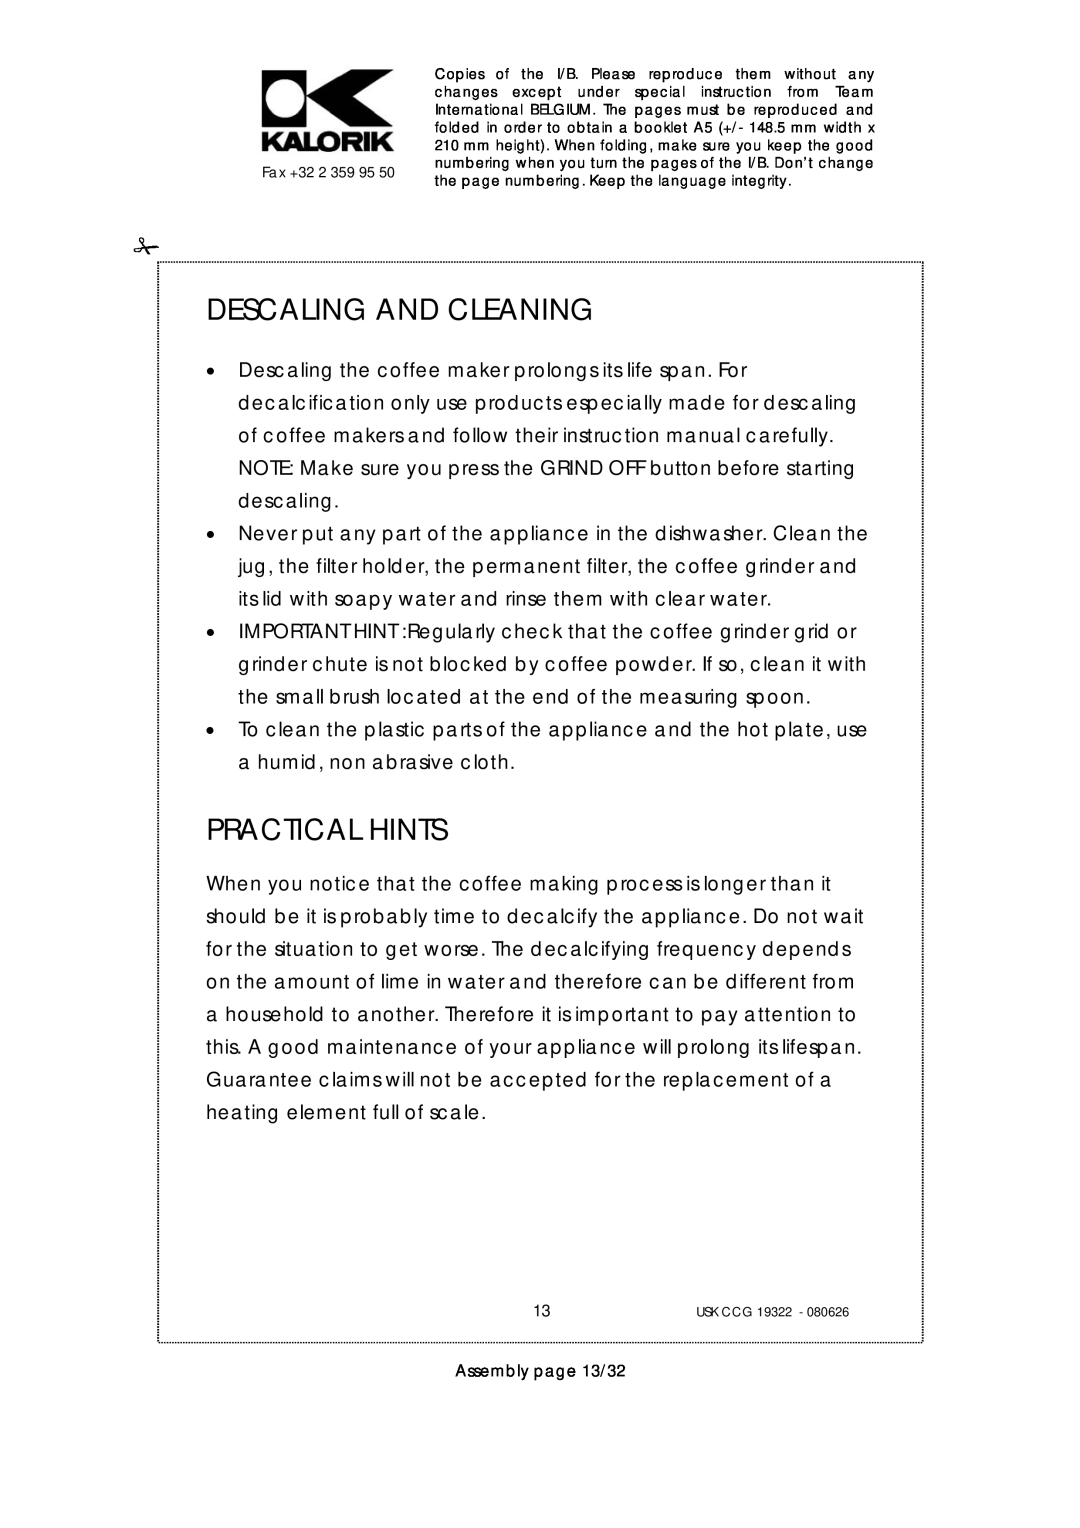 Kalorik USK CCG 19322, USK CCG080626 manual Descaling And Cleaning, Practical Hints, Assembly page 13/32 